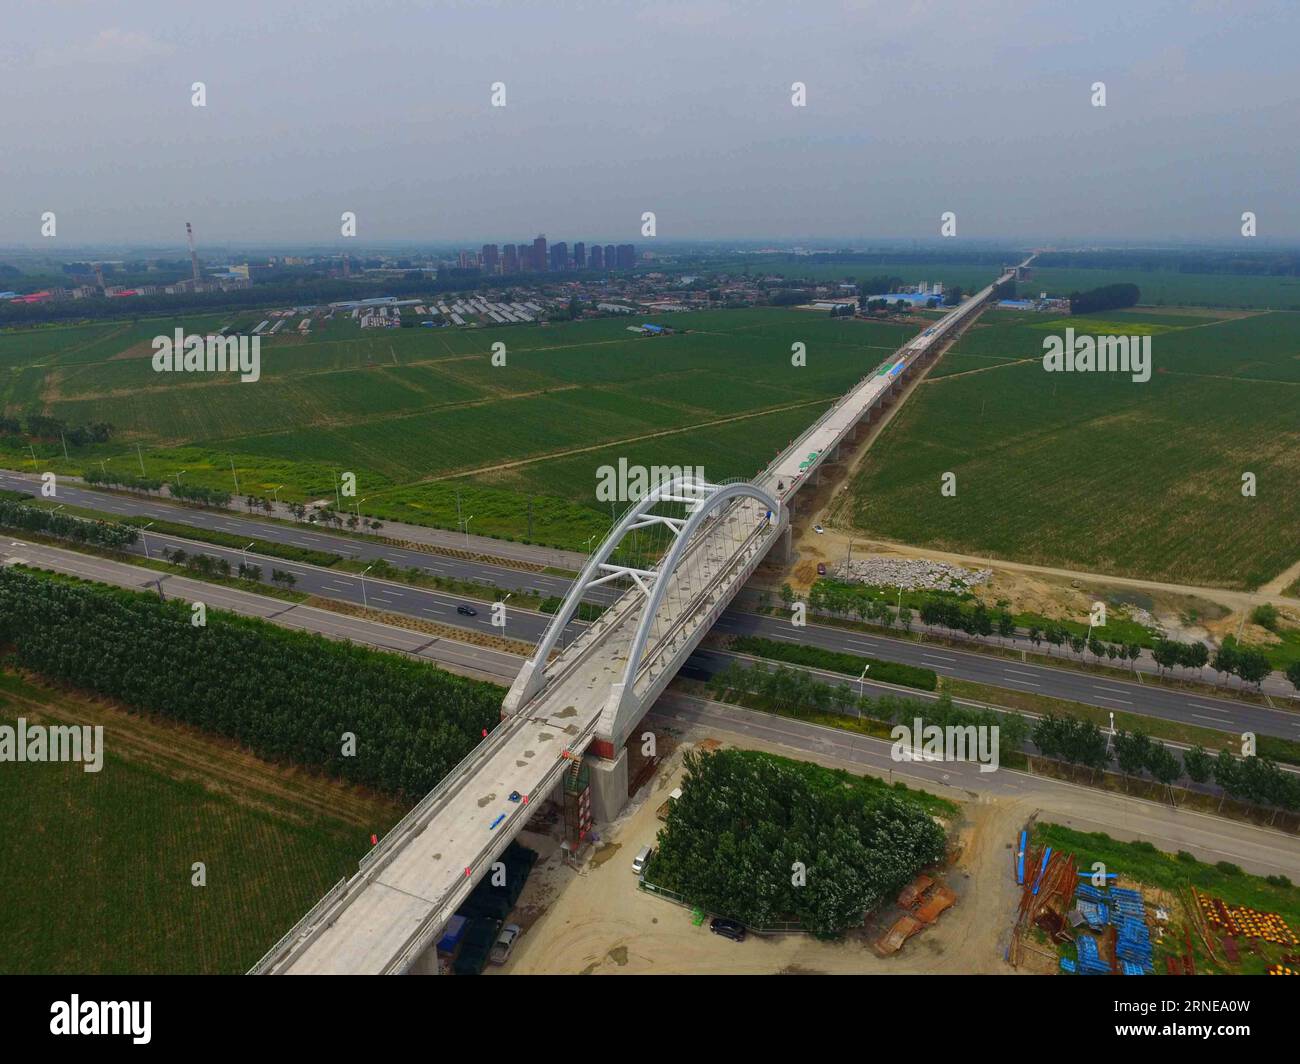 (160615) -- SHENYANG, June 15, 2016 -- Photo taken on June 15, 2016 shows the Puhe River Bridge of Liaoning section of Beijing-Shenyang high-speed railway in northeast China s Liaoning Province. The 700-kilometer-long railway line, with a designed speed of 350 km per hour, is expected to be put into operation in 2019. The construction work of the line s Liaoning section has entered track-related phase. )(mcg) CHINA-BEIJING-SHENYANG-HIGH-SPEED RAILWAY-CONSTRUCTION (CN) XingxGuangli PUBLICATIONxNOTxINxCHN   160615 Shenyang June 15 2016 Photo Taken ON June 15 2016 Shows The  River Bridge of Liaon Stock Photo